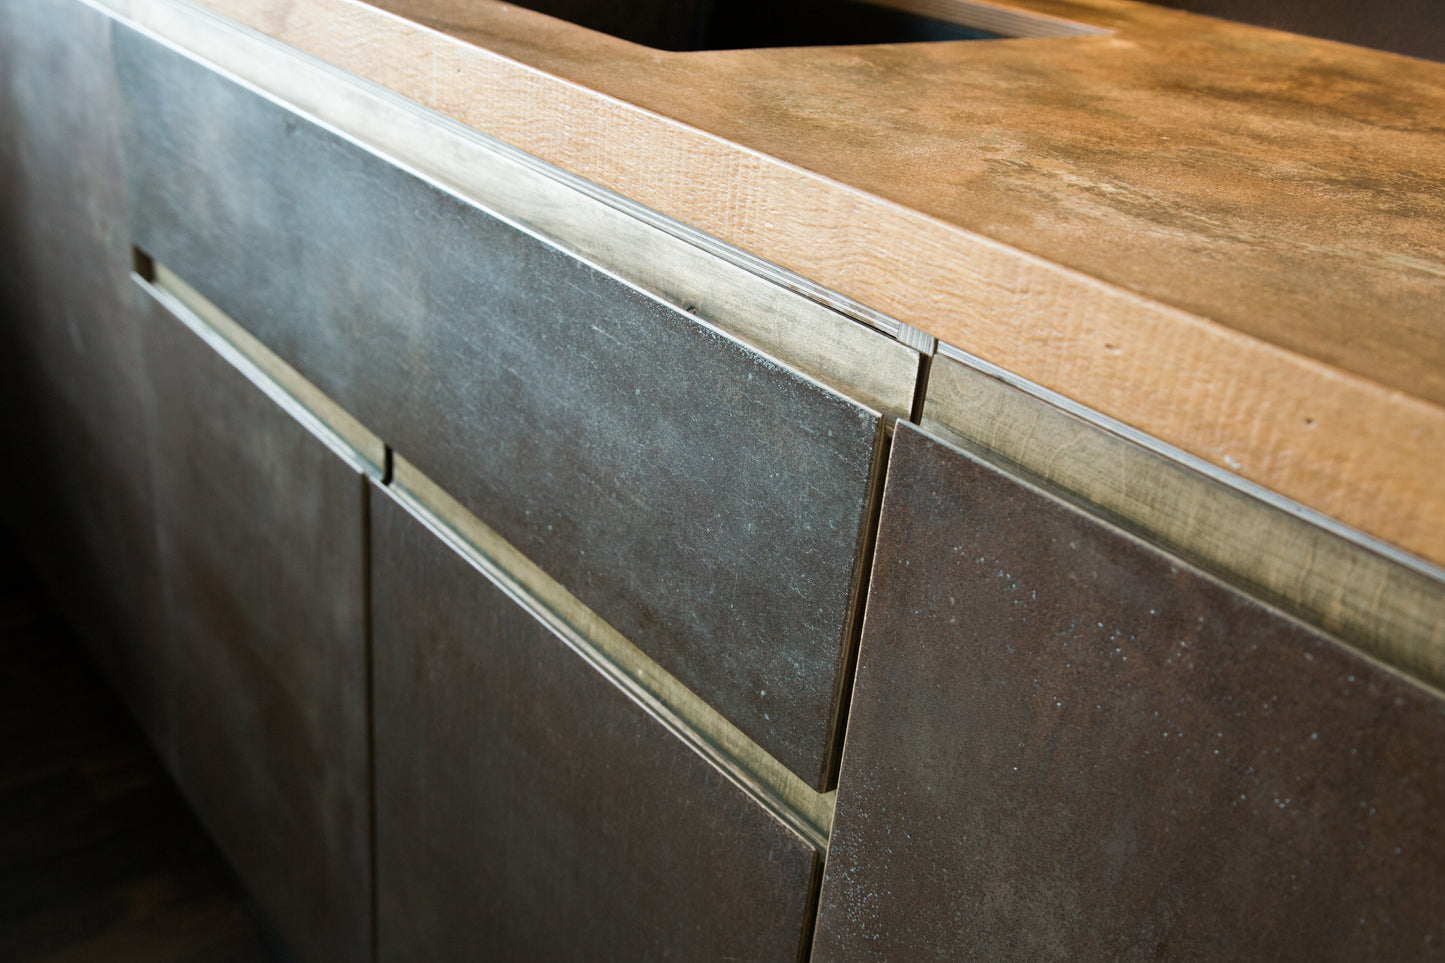 Kitchen drawer fronts made from KAVA Coffee. Used coffee grounds pressed into a birch ply substrate. Pictured, one drawers is marginally open. The handles are made with an added oak lip.